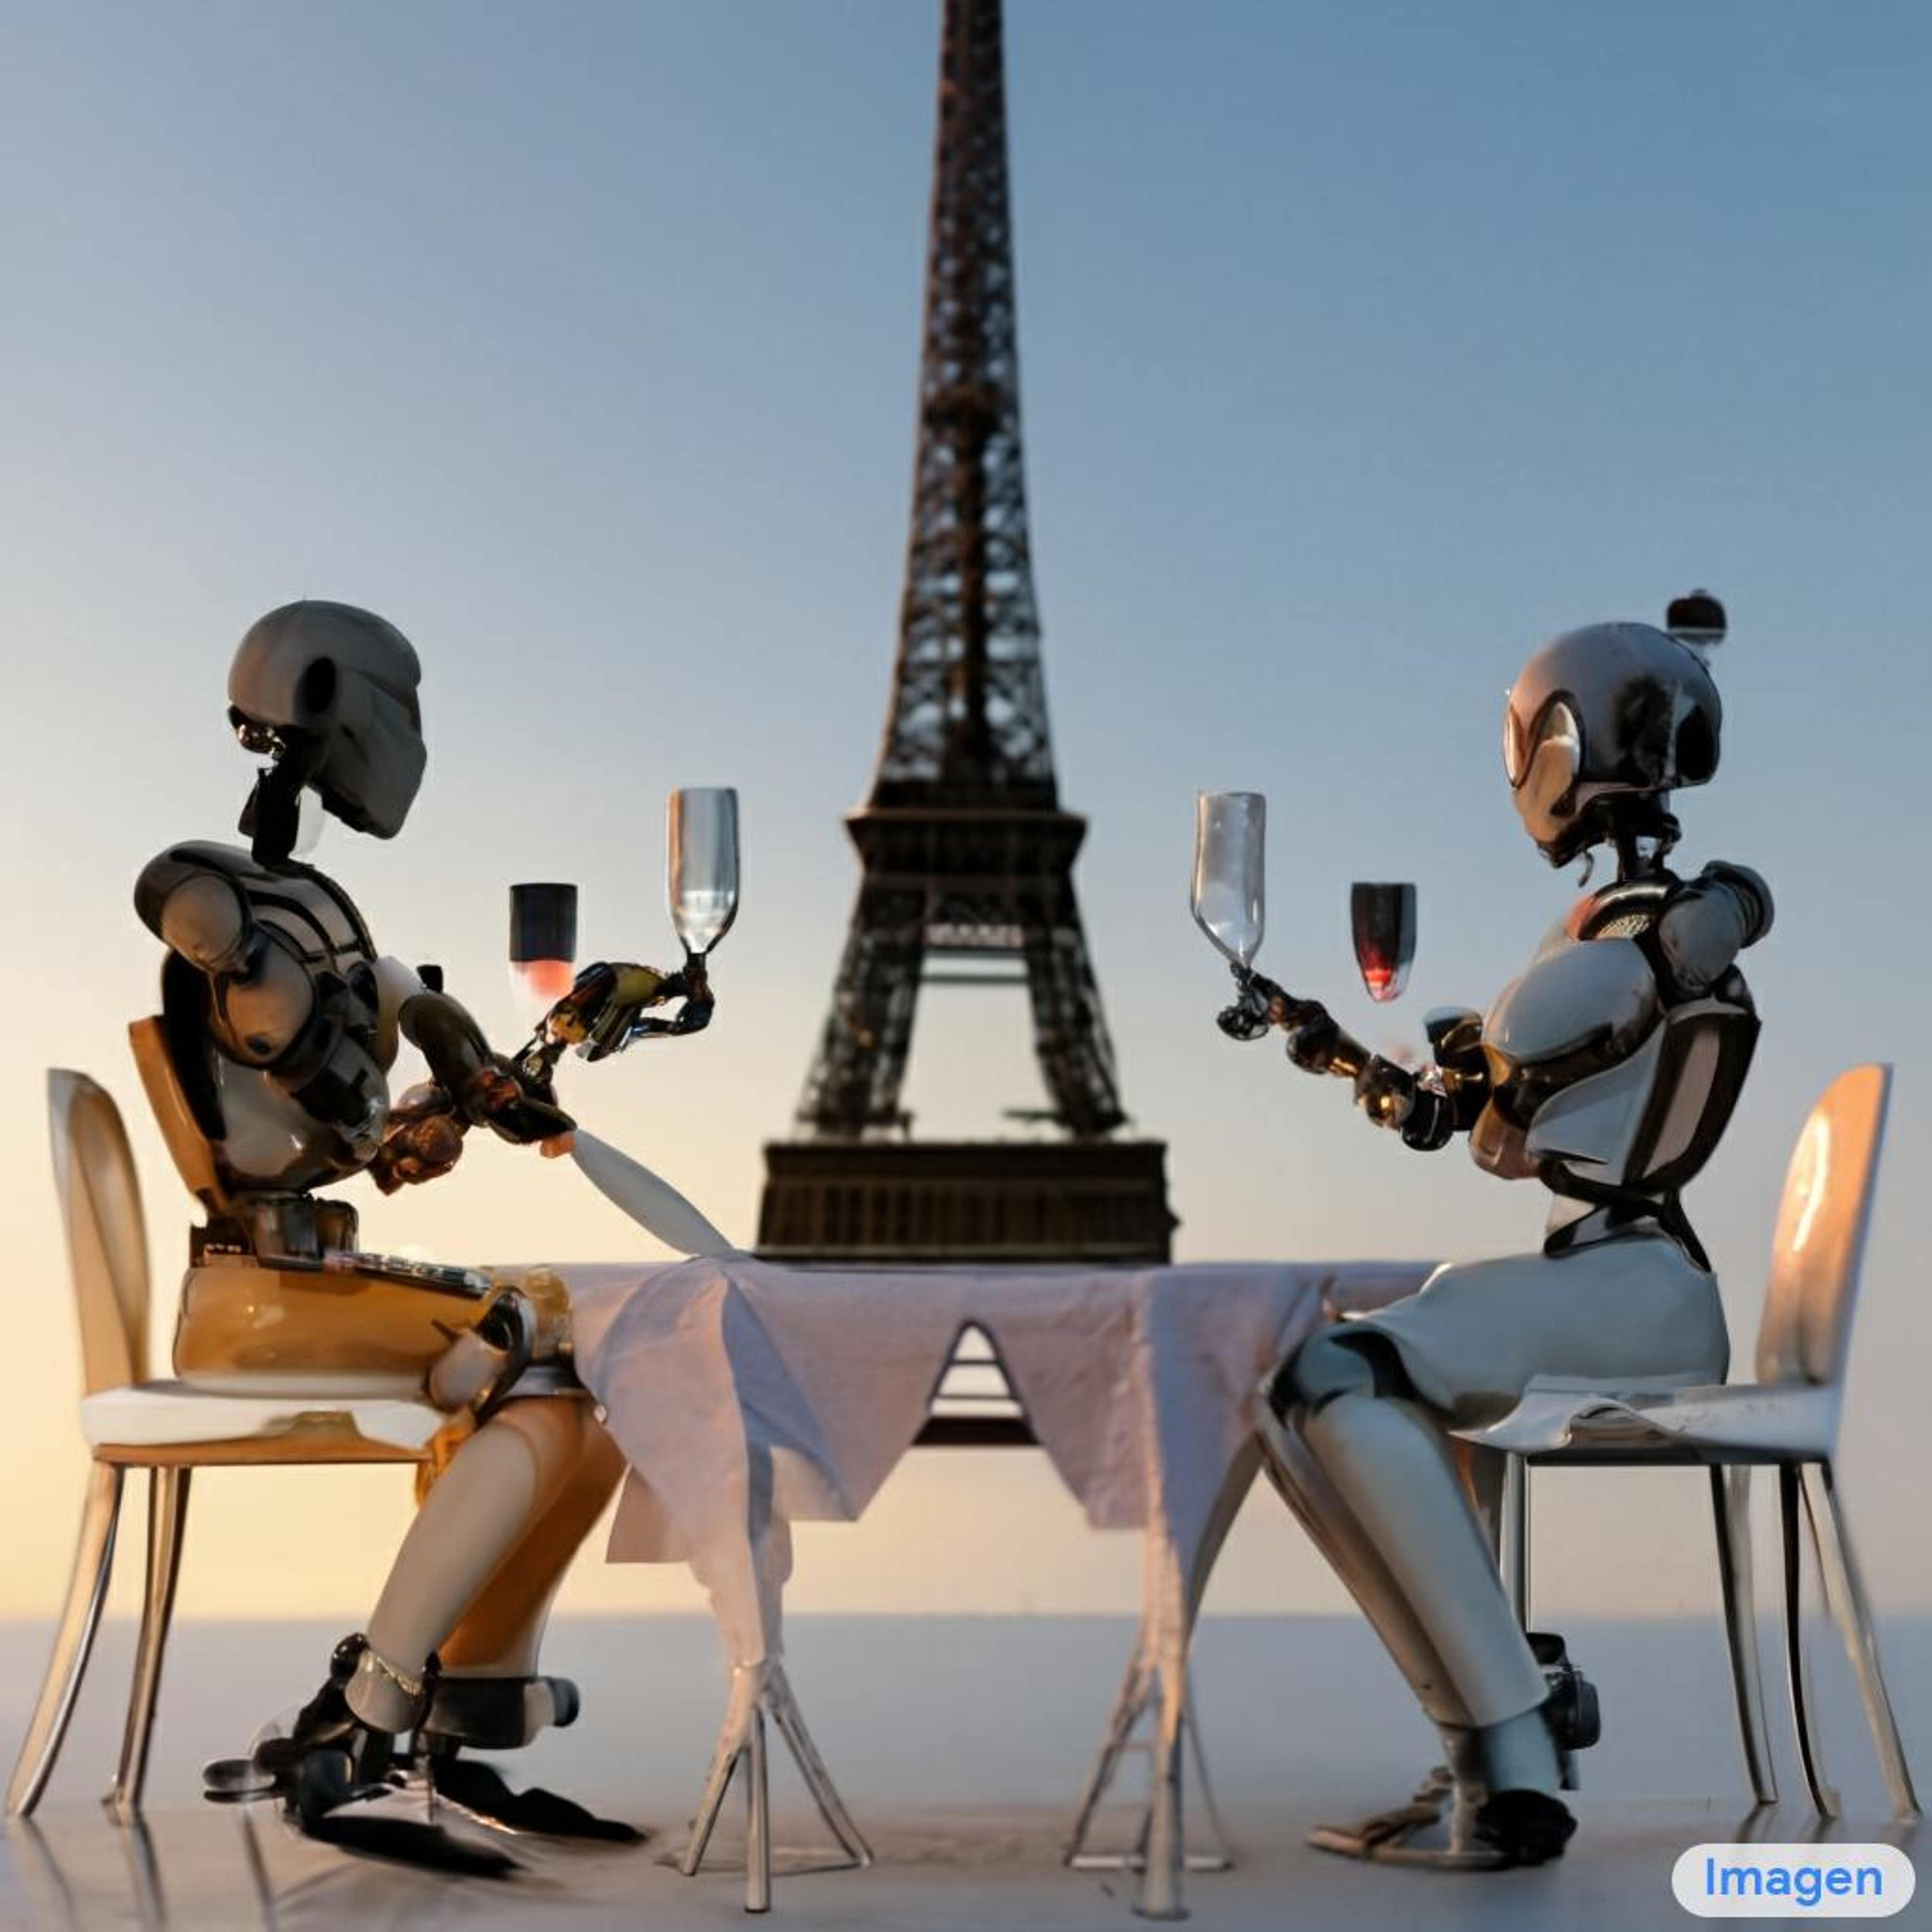 "A robot couple fine dining with Eiffel Tower in the Background" Rendered by Google Imagen, 2022